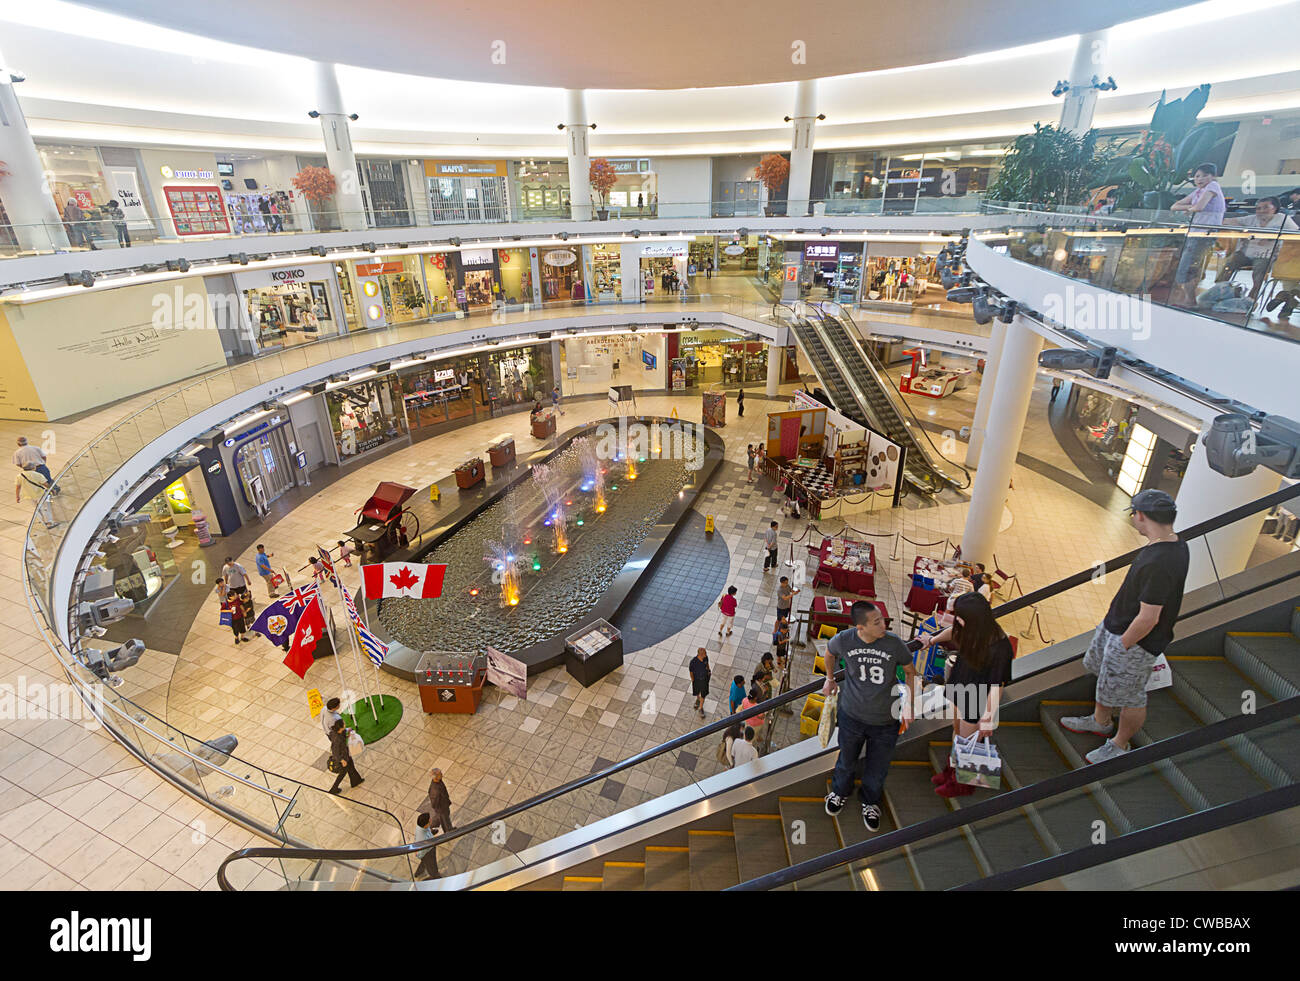 Central atrium in Aberdeen Centre, a shopping mall in Richmond, BC, Canada with a strong Asian focus. Stock Photo